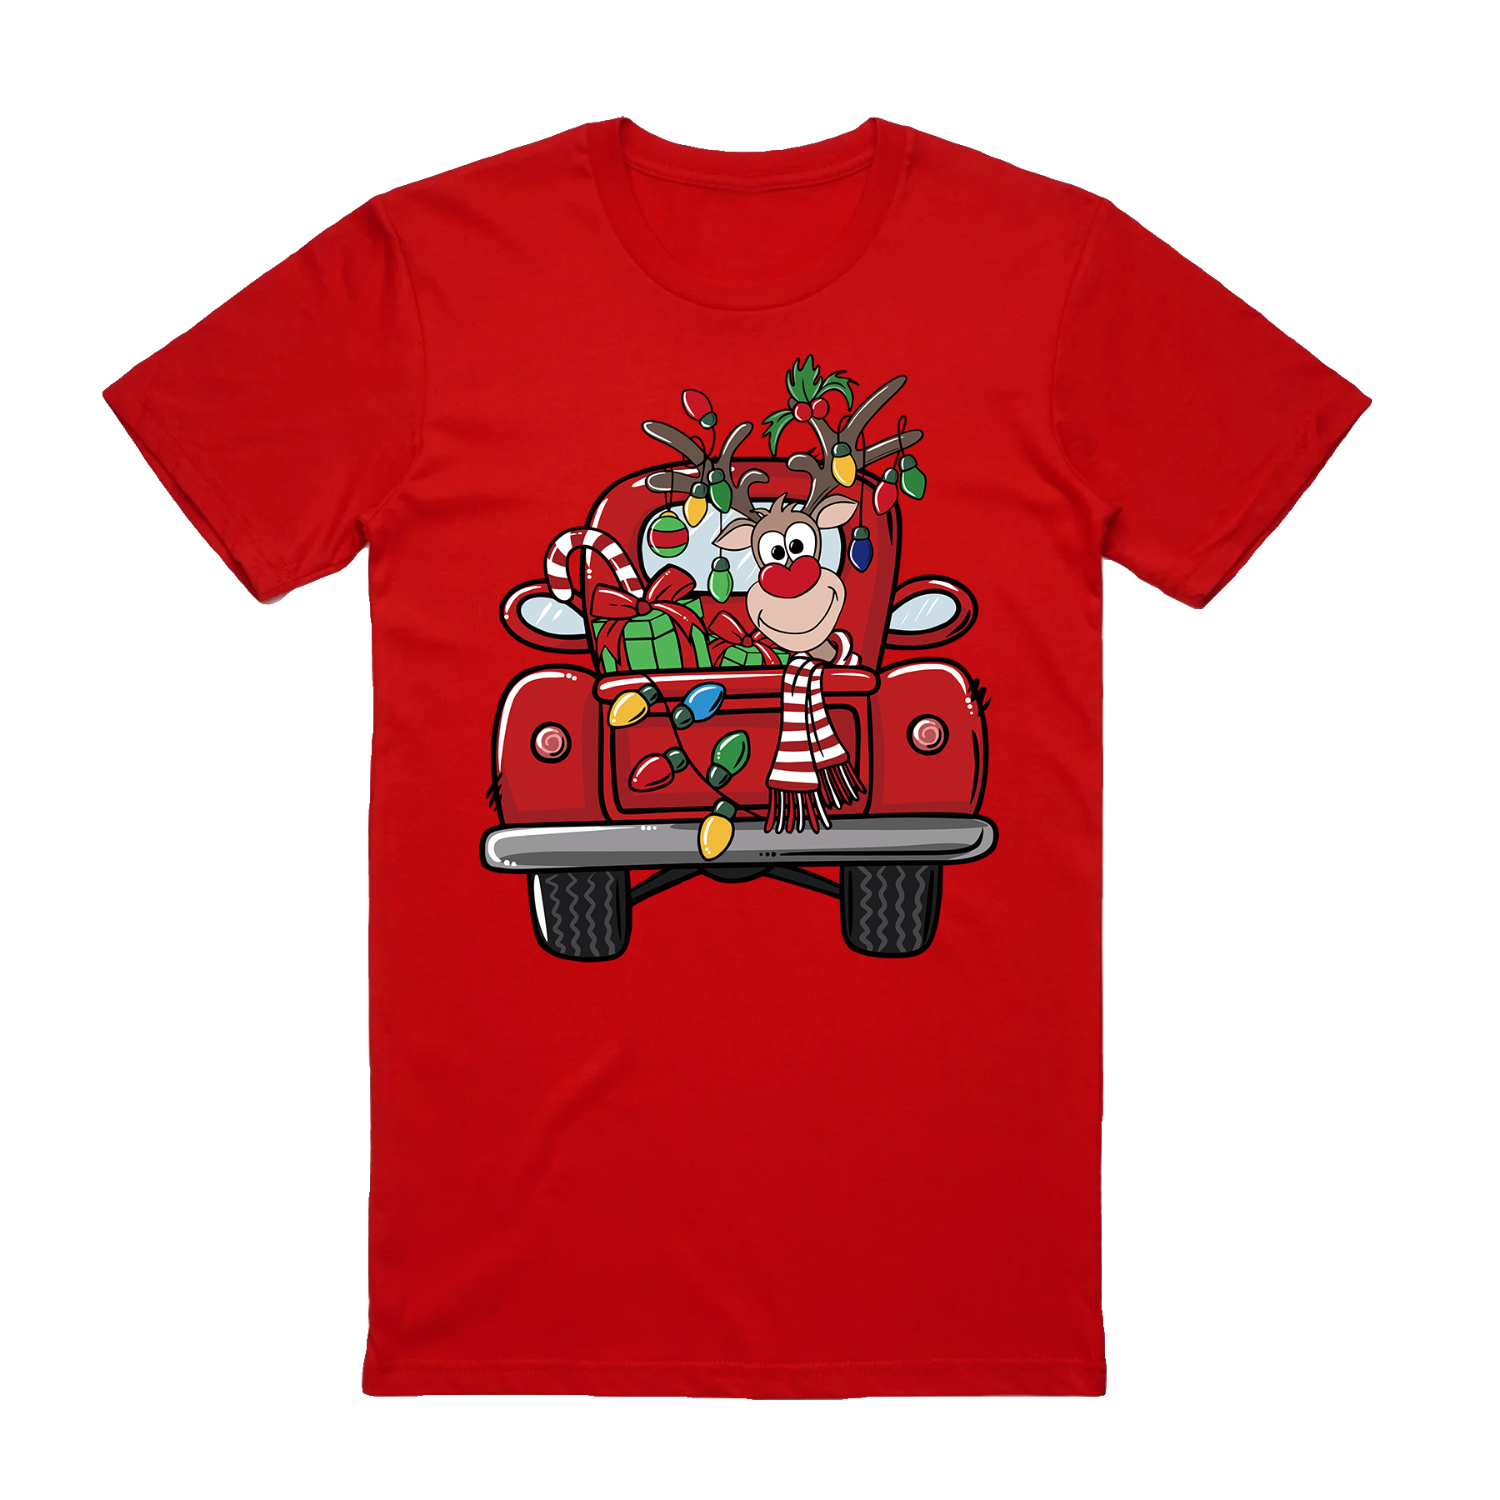 100% Cotton Christmas T-shirt Adult Unisex Tee Tops - Car with Reindeer